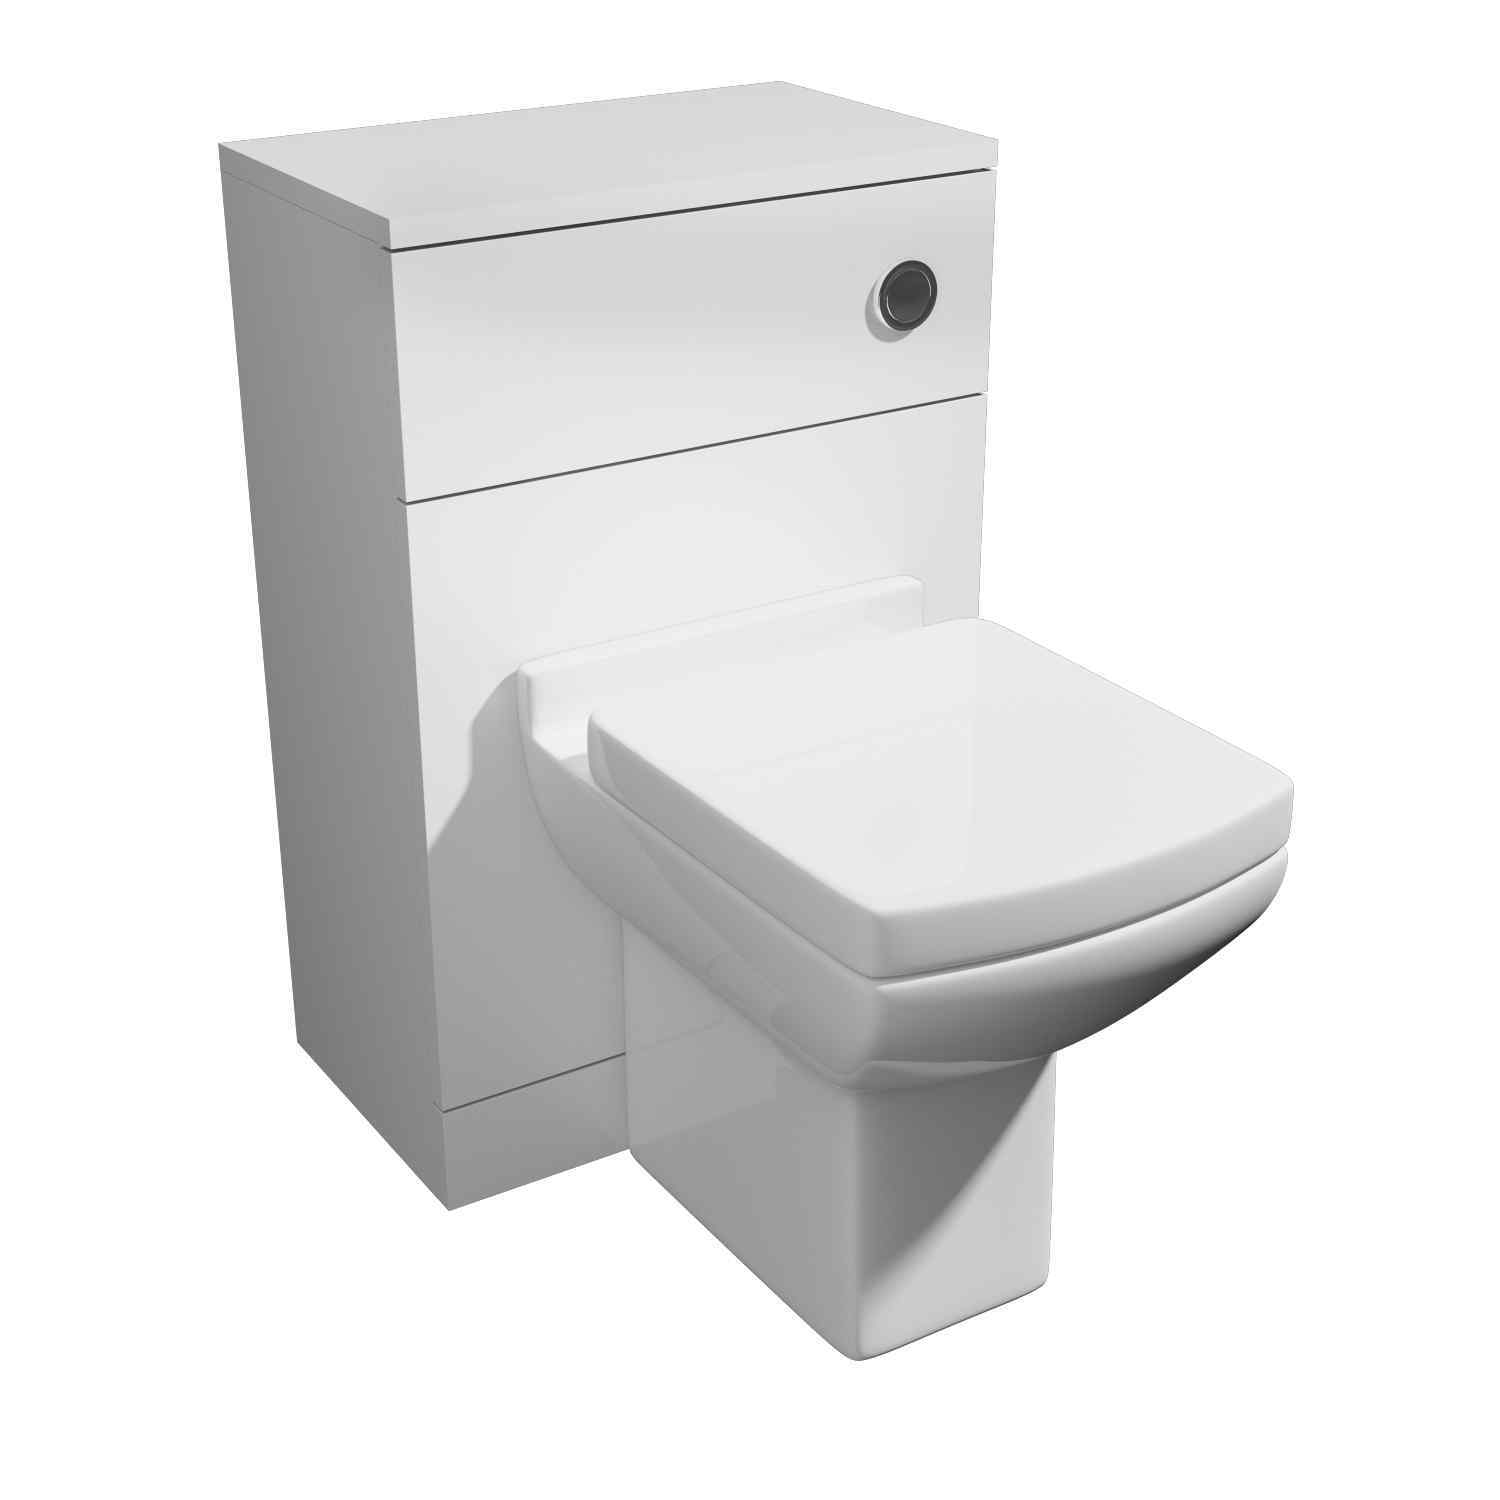 Pure WC Unit Toilet & Basin: The Perfect Combination Unit for Your Bathroom